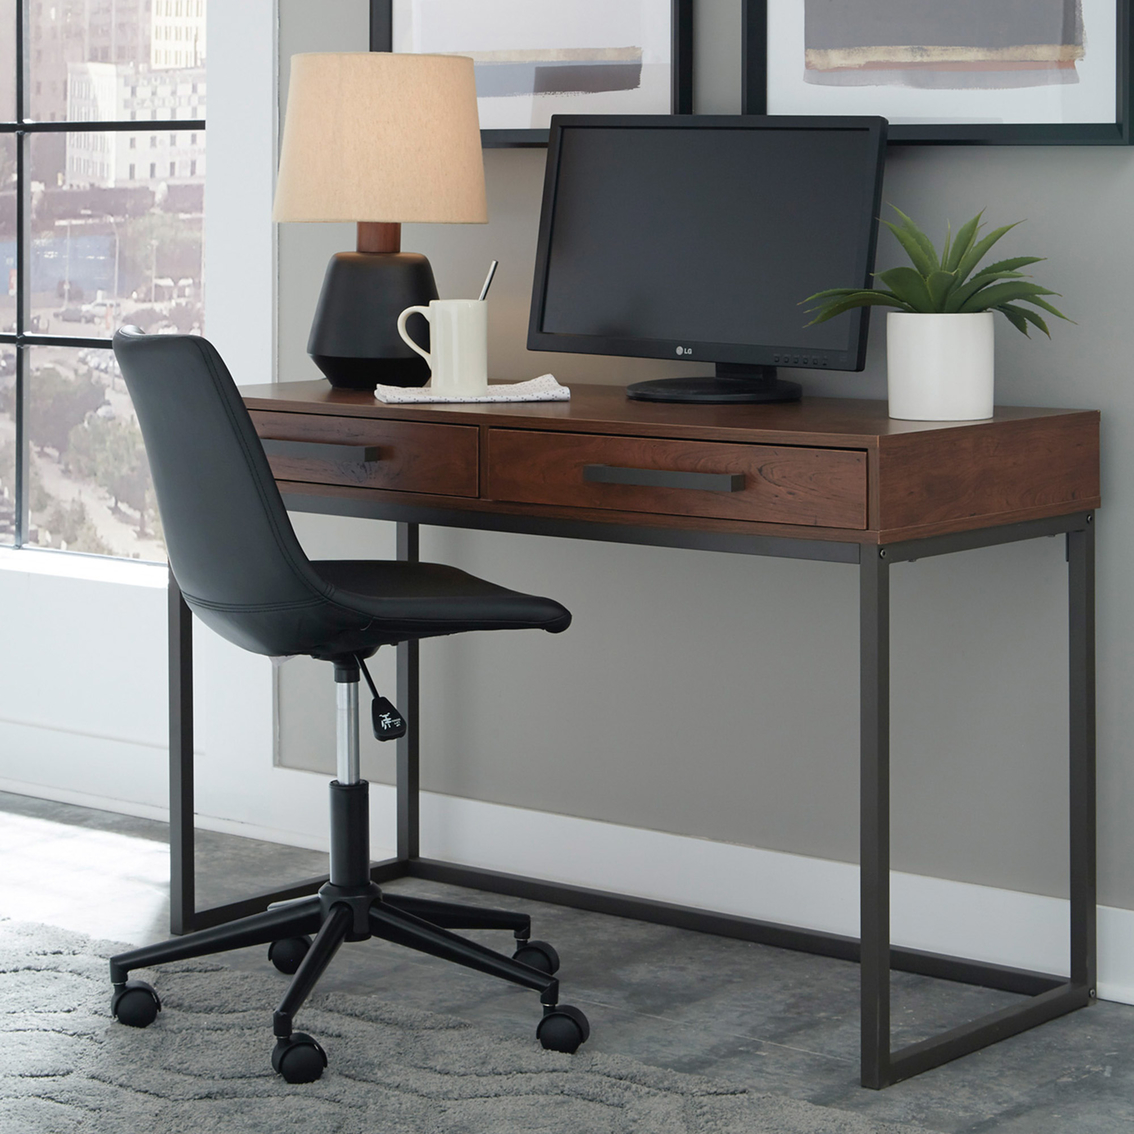 Signature Design by Ashley Horatio Home Office Small Desk - Image 6 of 6